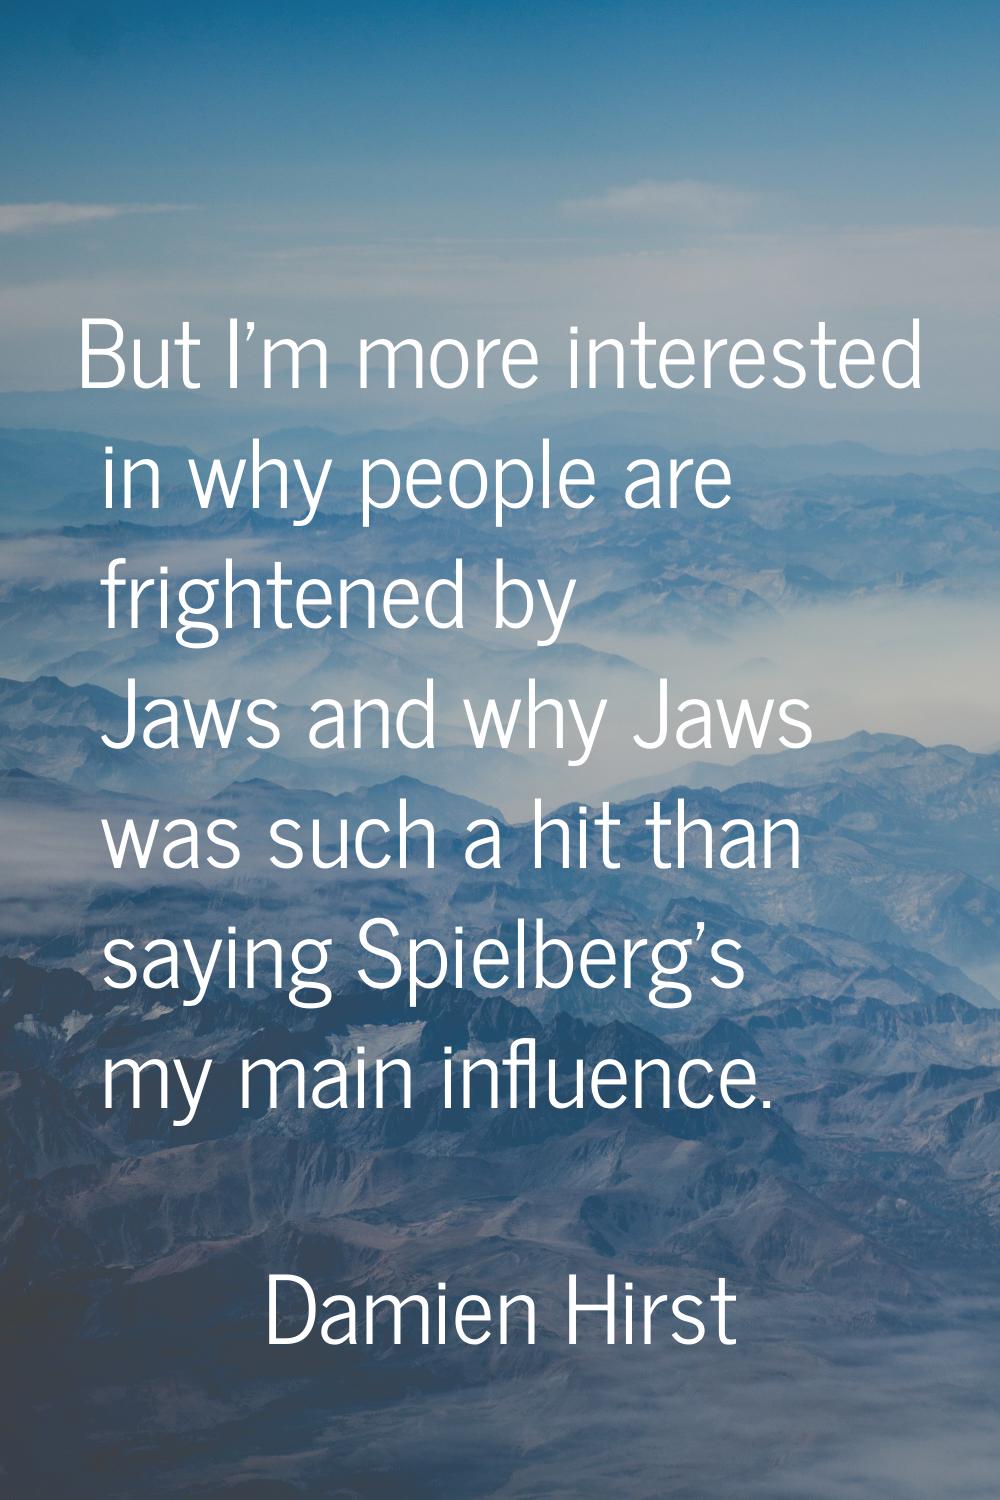 But I'm more interested in why people are frightened by Jaws and why Jaws was such a hit than sayin